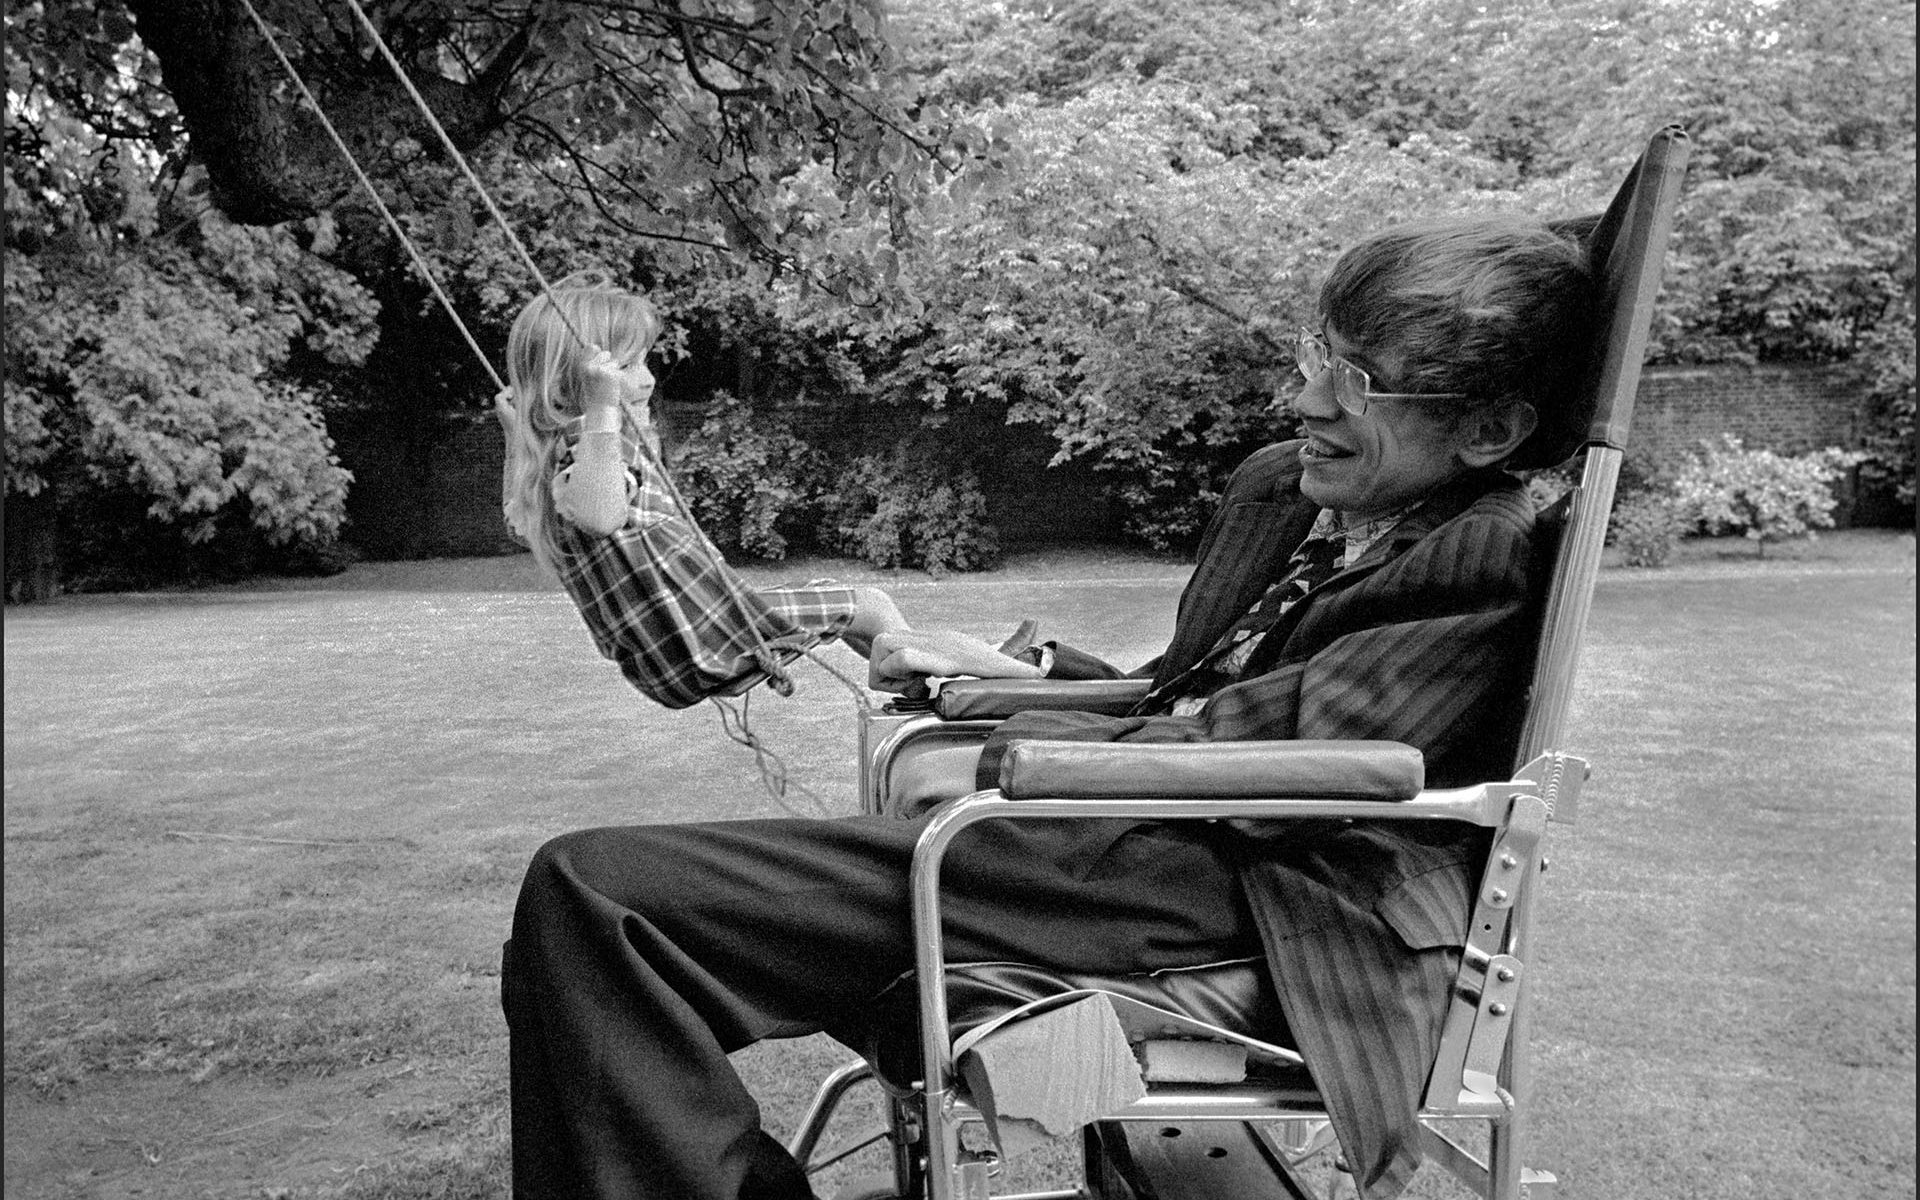 Stephen Hawking in chair as young girl swings on tree swing in background